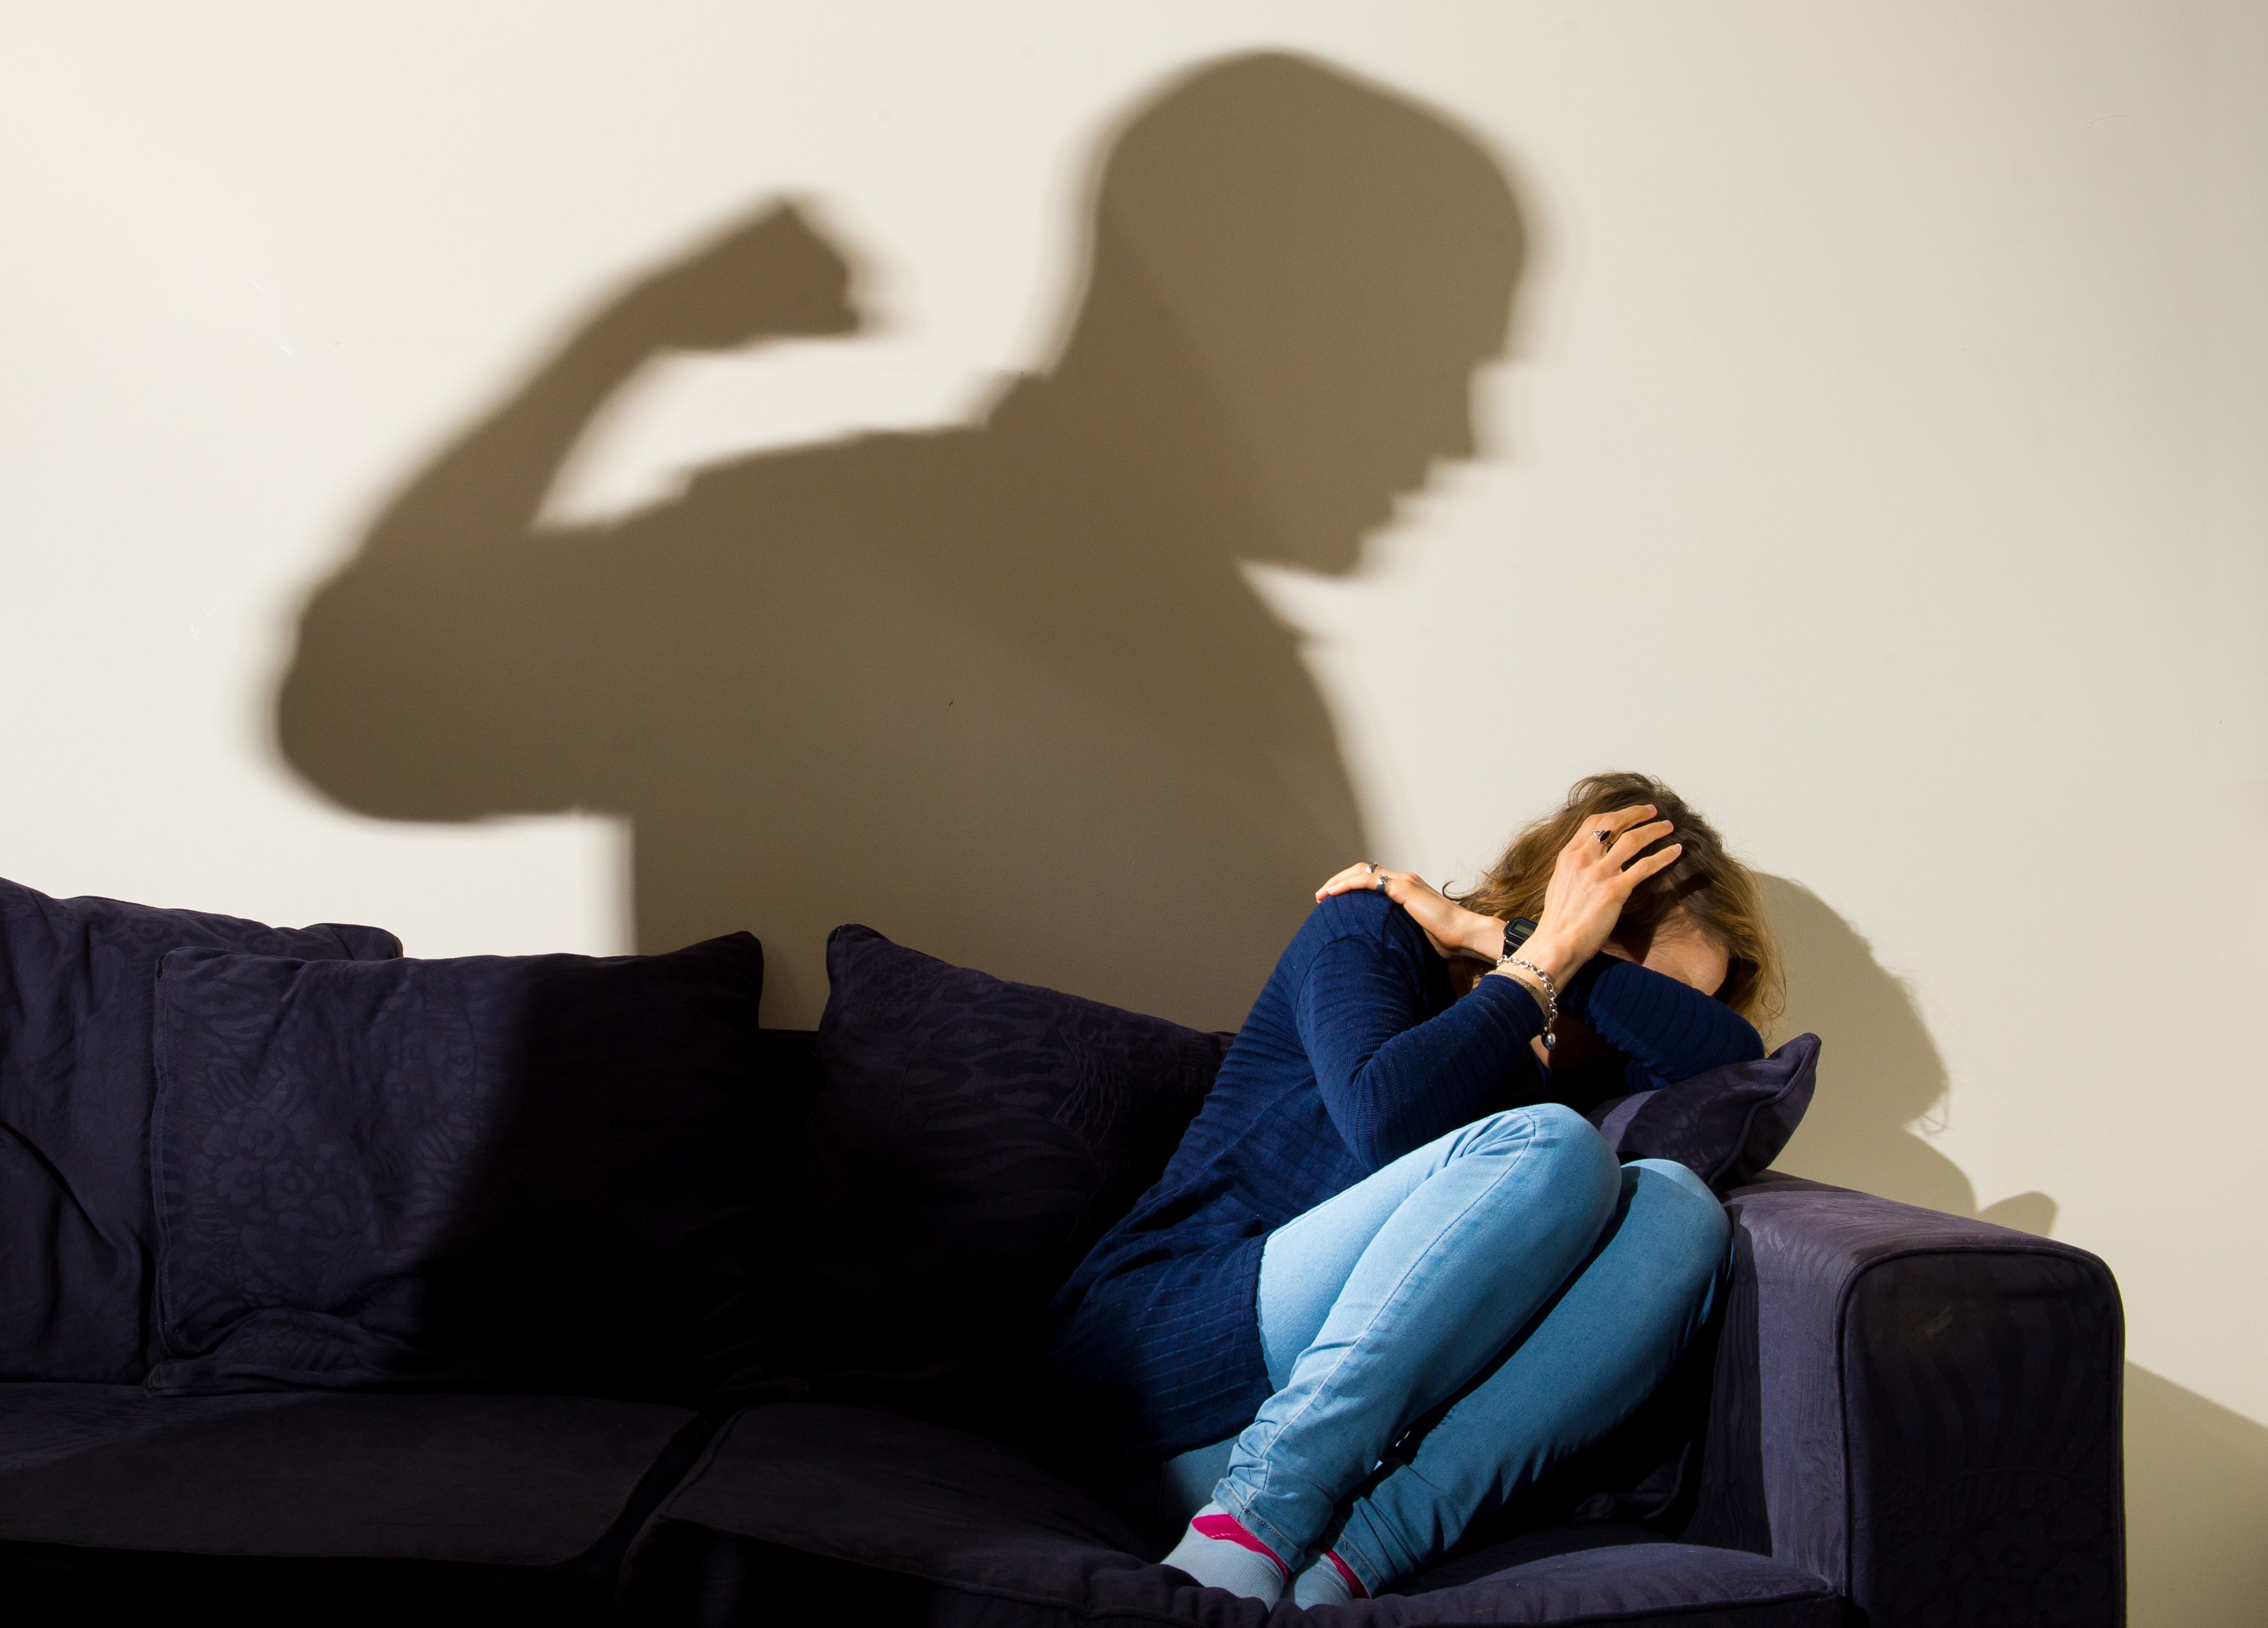 Demand for domestic abuse refuges rose 30% in the first three months of 2022 as the cost of living crisis took hold, the charity Hestia has said (Dominic Lipinski/PA)